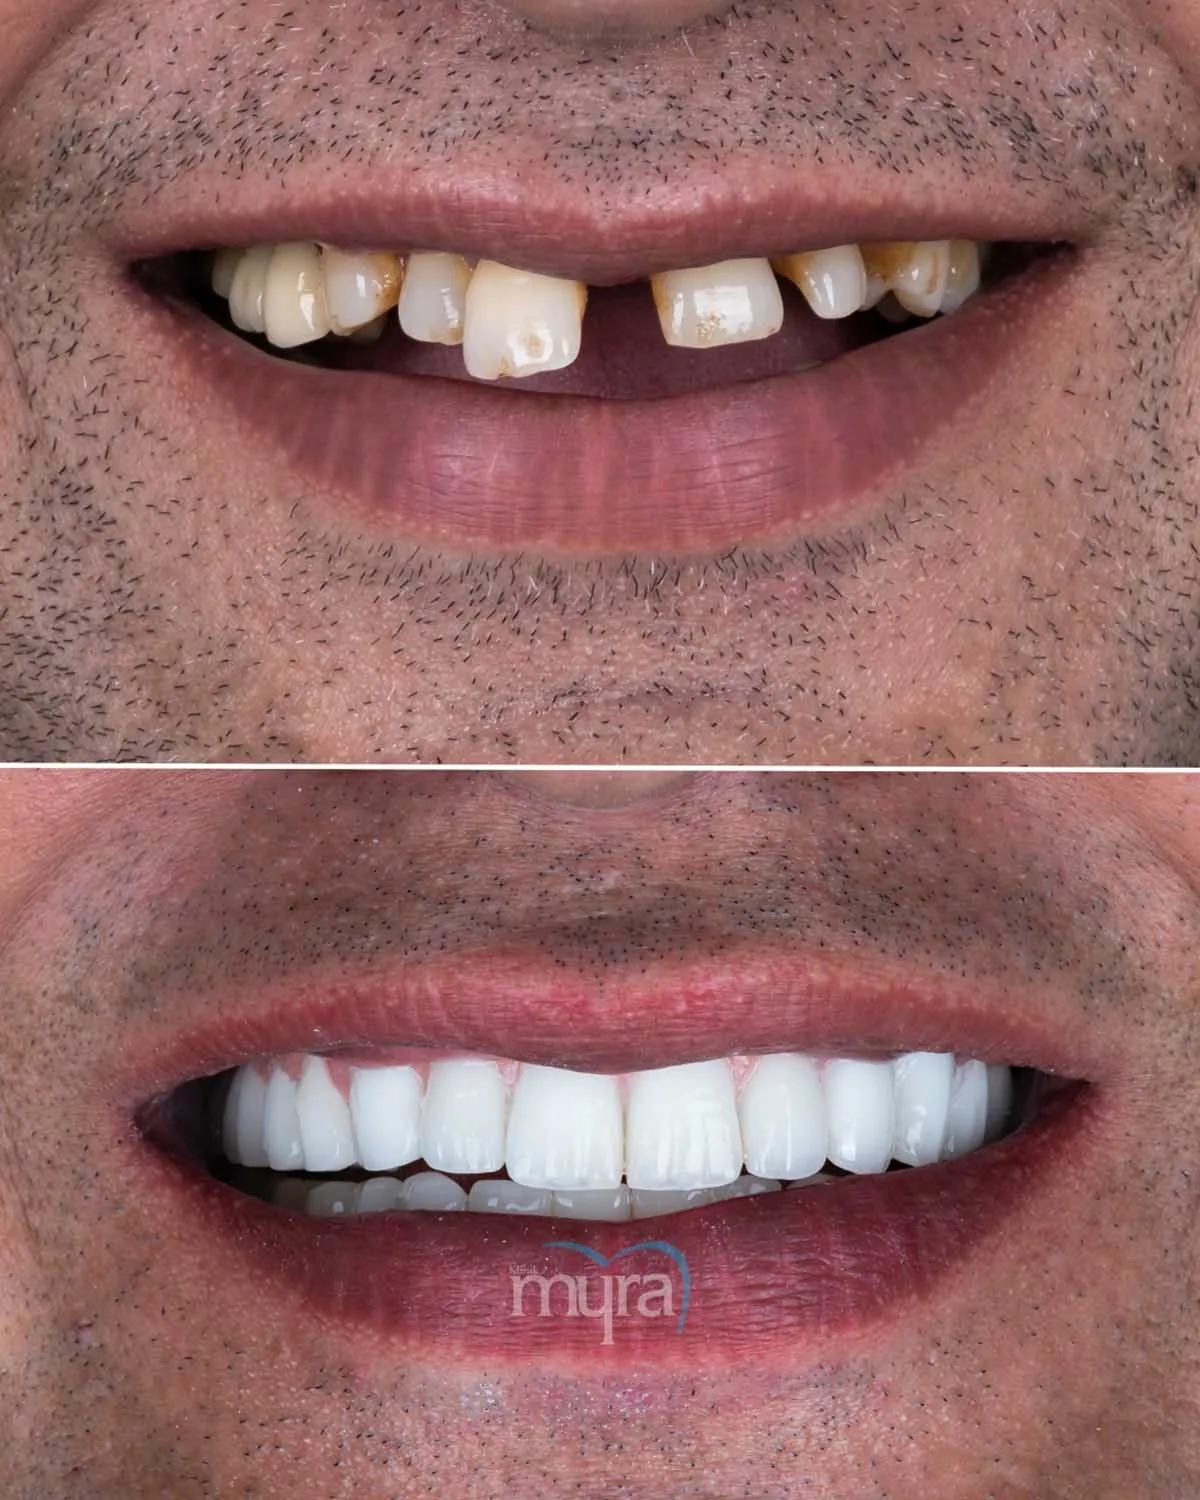 Typical number of veneers required for dental restoration,